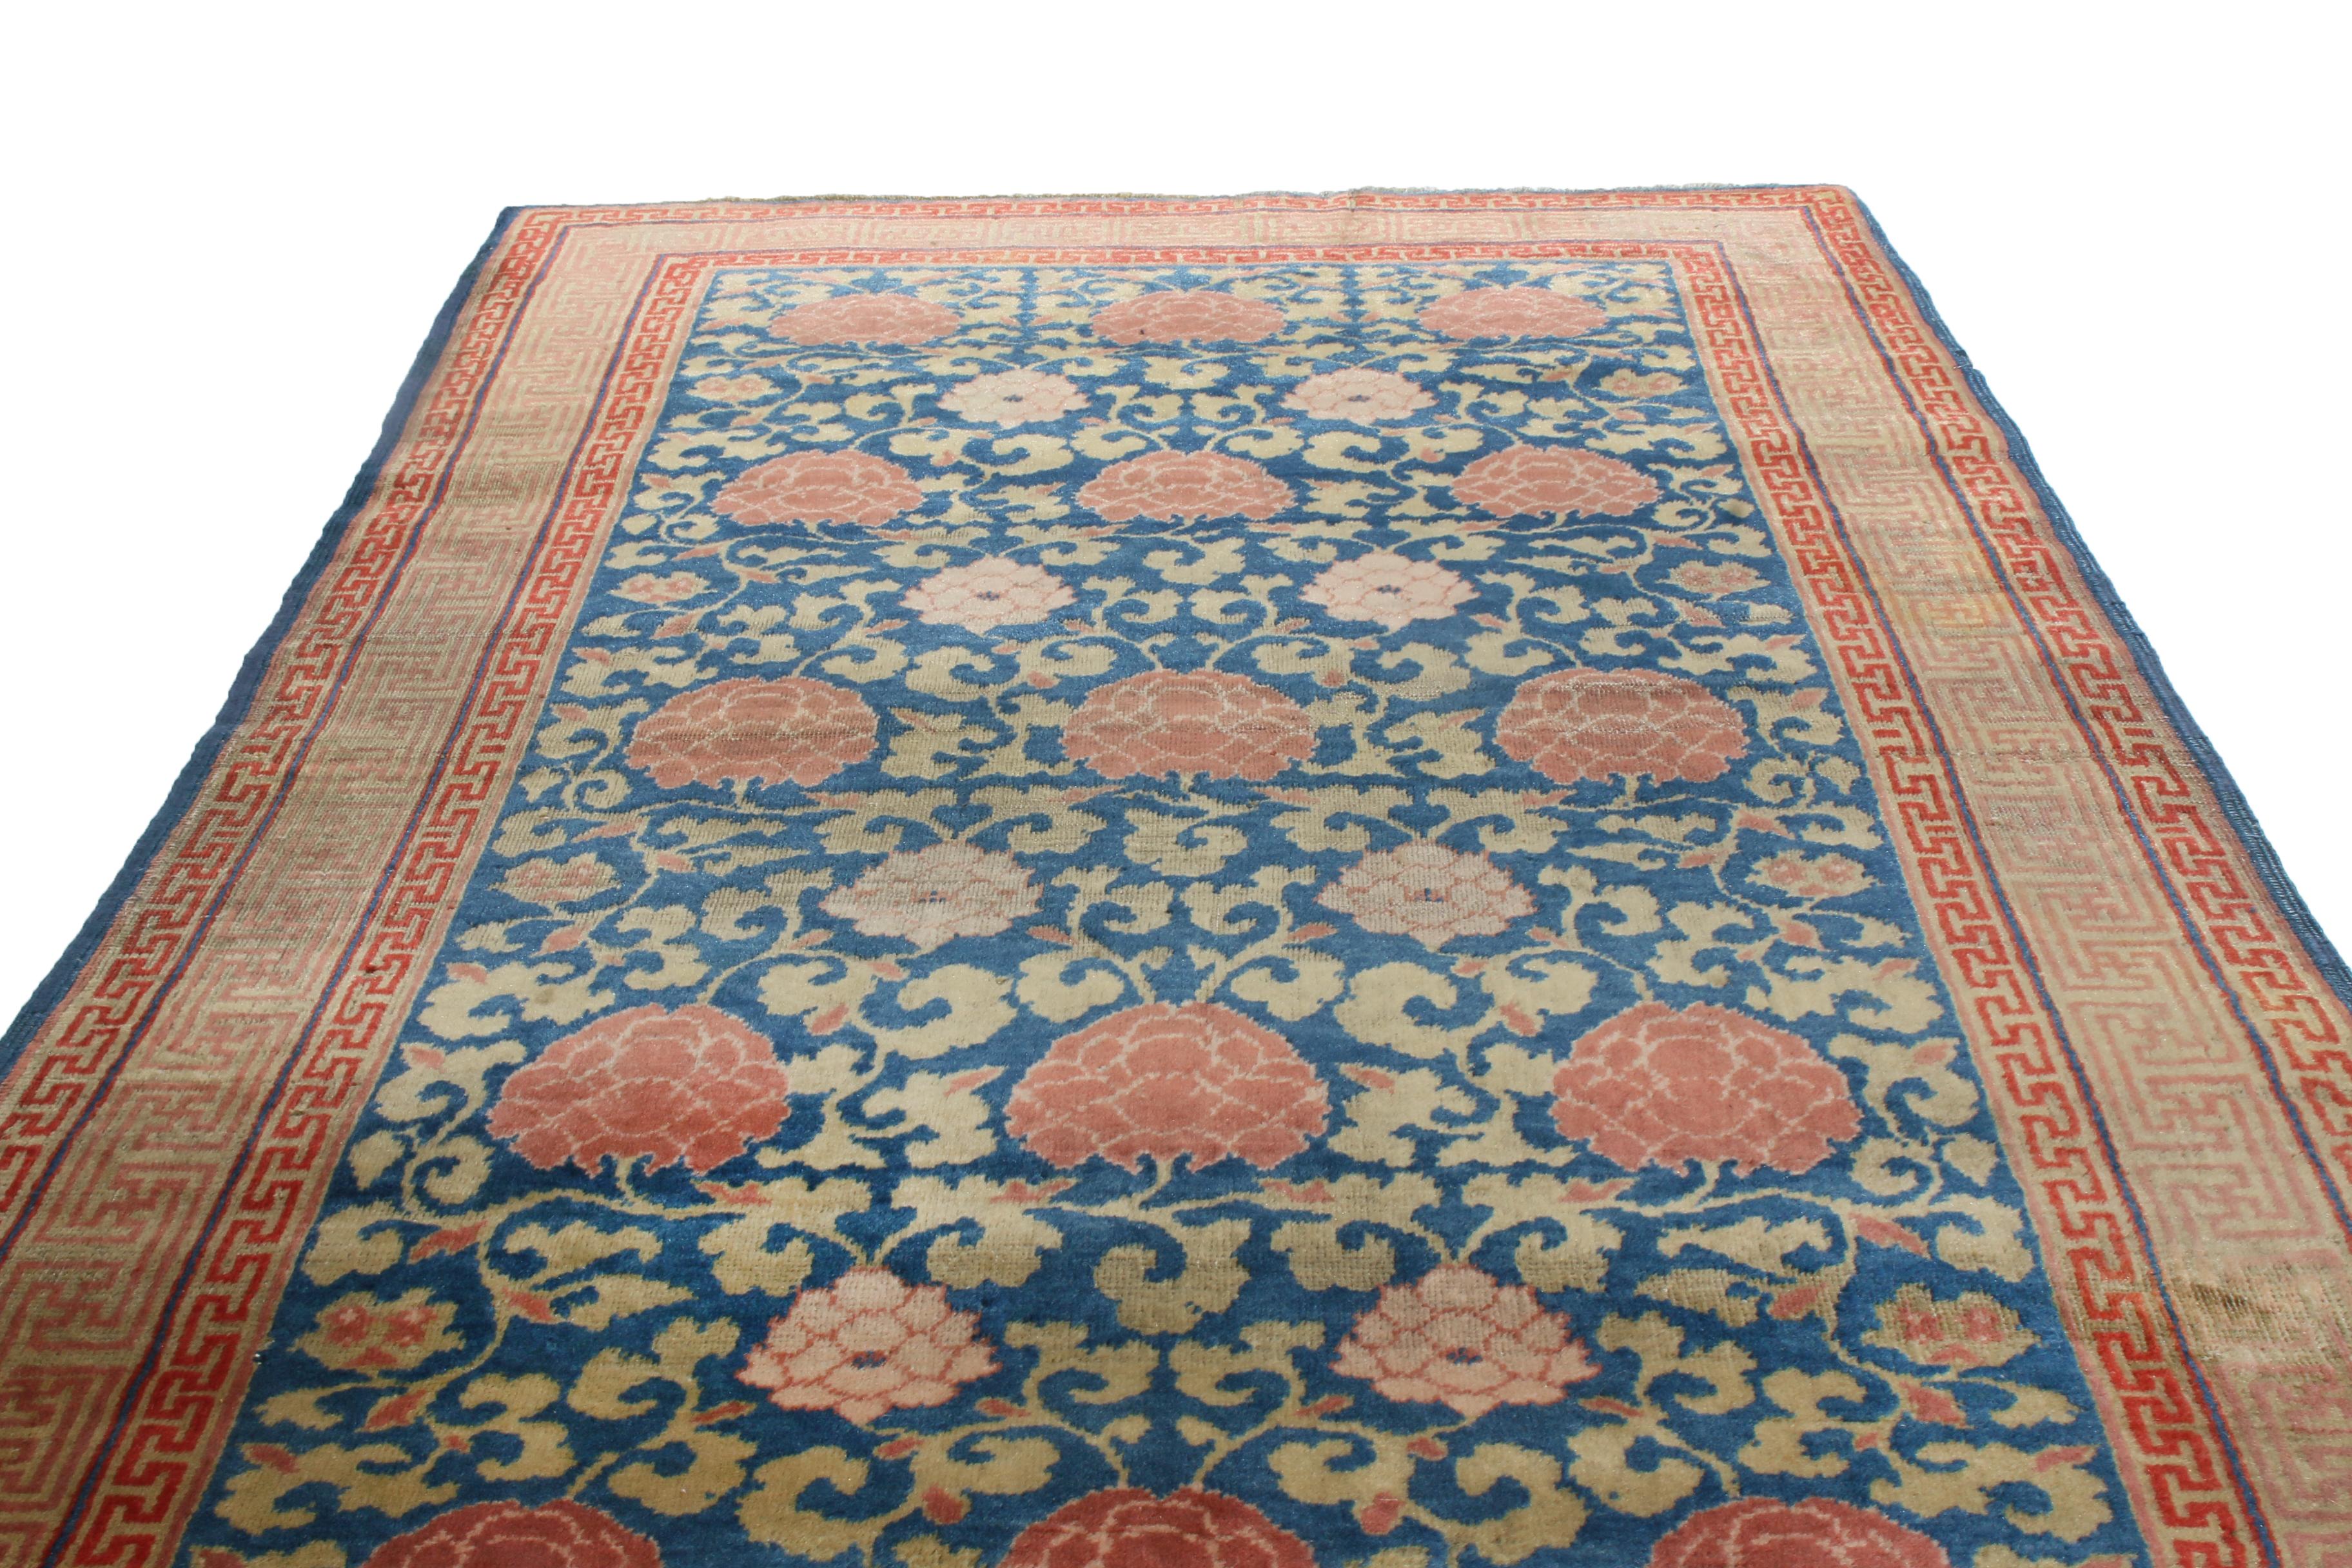 Originating from East Turkestan between 1900-1920, this antique transitional Samarkand wool rug features a distinct, uncommon mirrored series of borders, complementing a finely drawn field design. Hand knotted in high-quality wool, the elegant